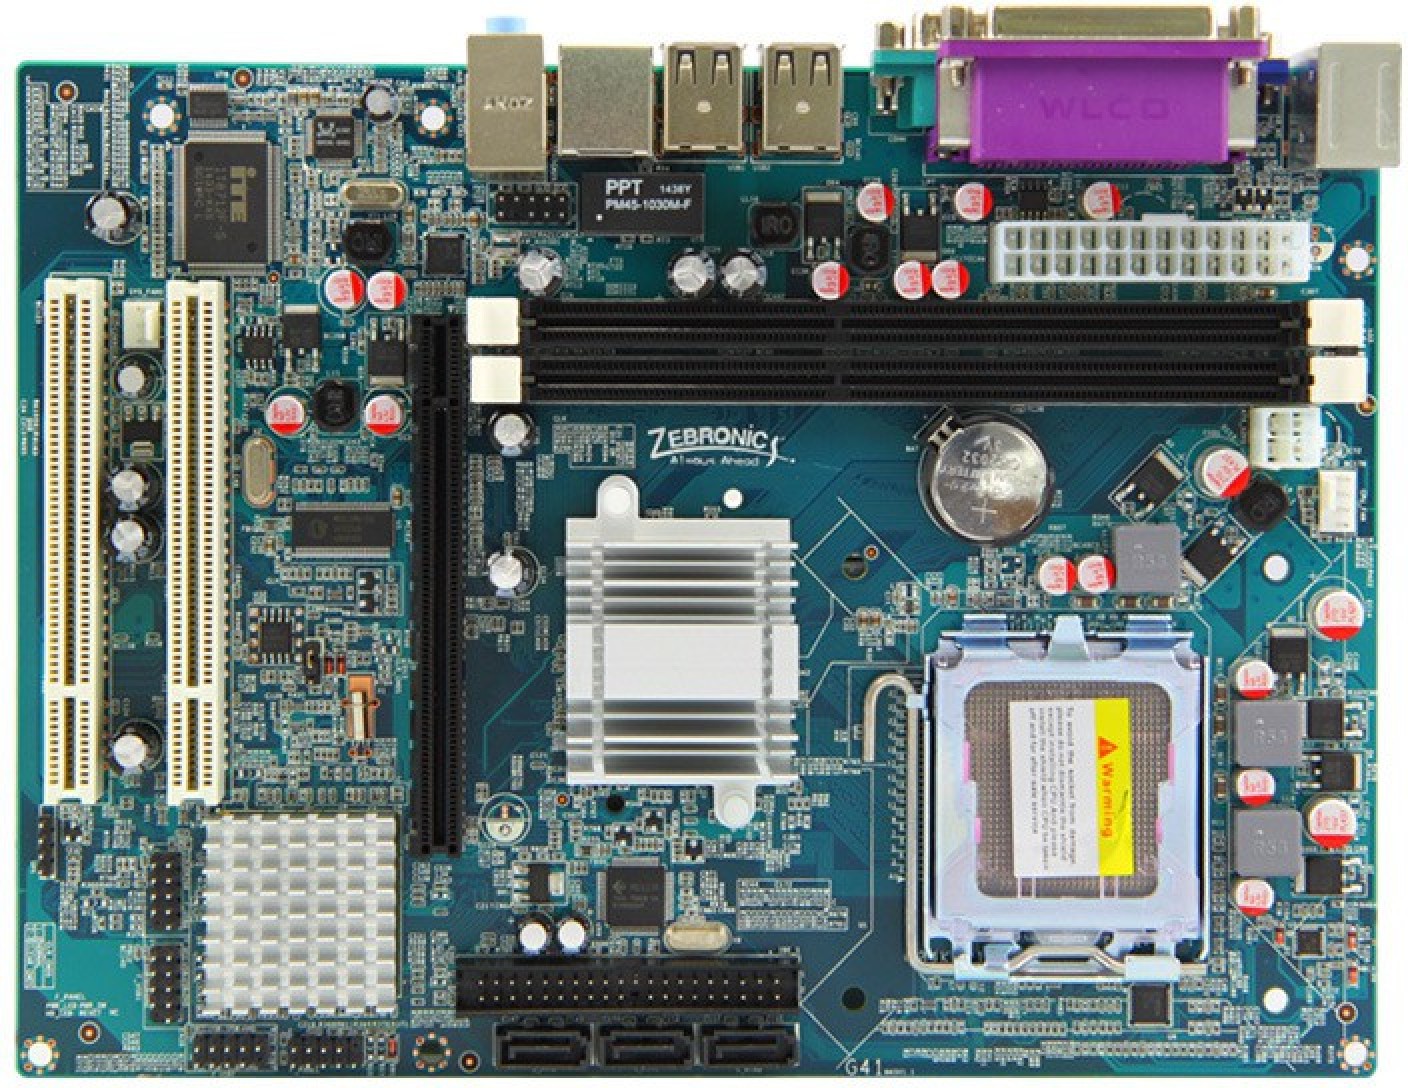 latest mobile intel 965 express chipset family driver